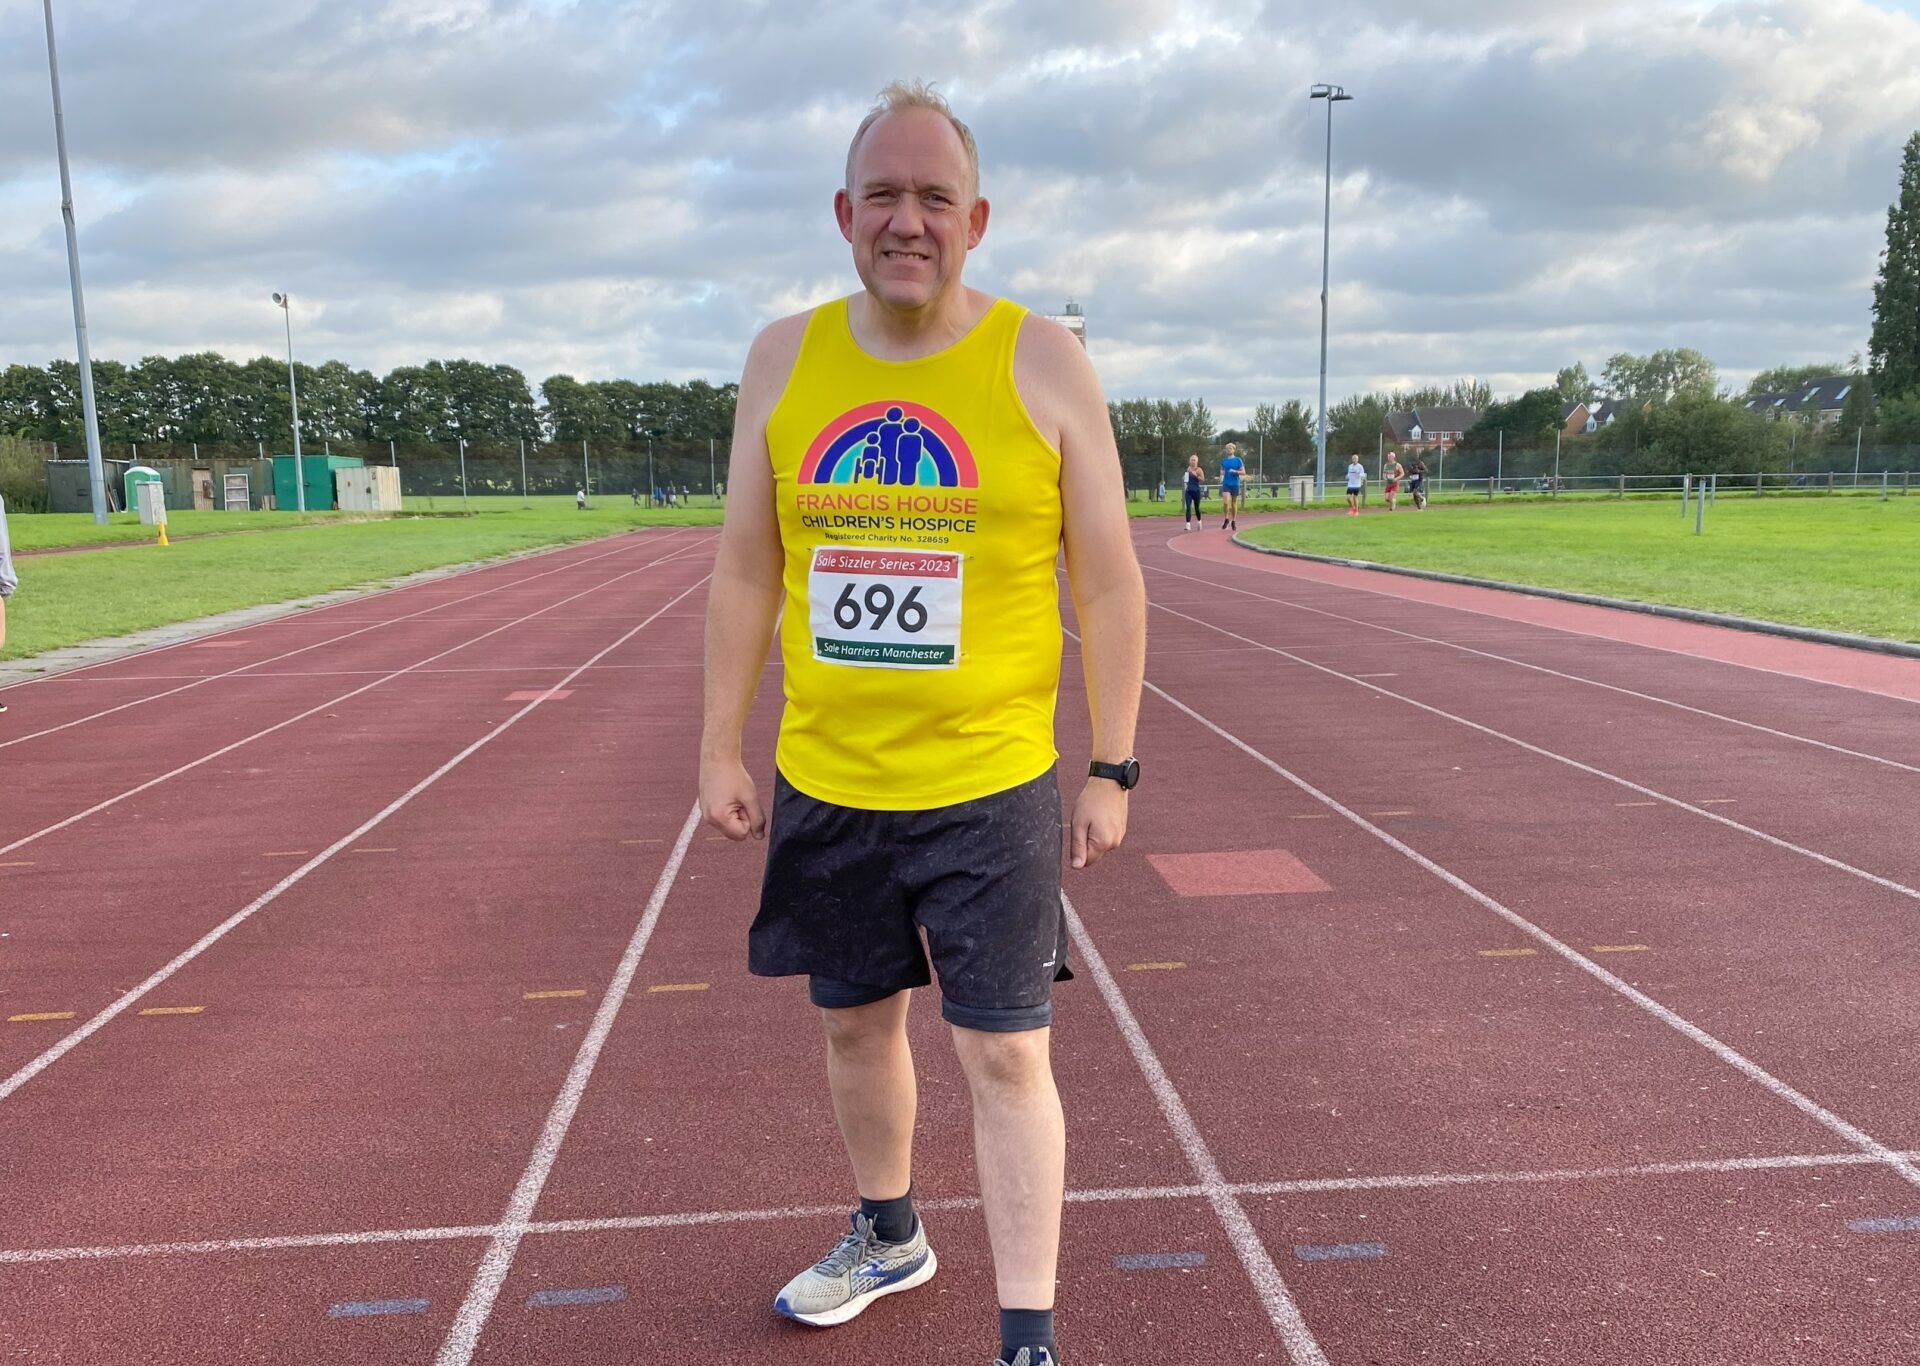 Man wearing a yellow running vest standing on a running track